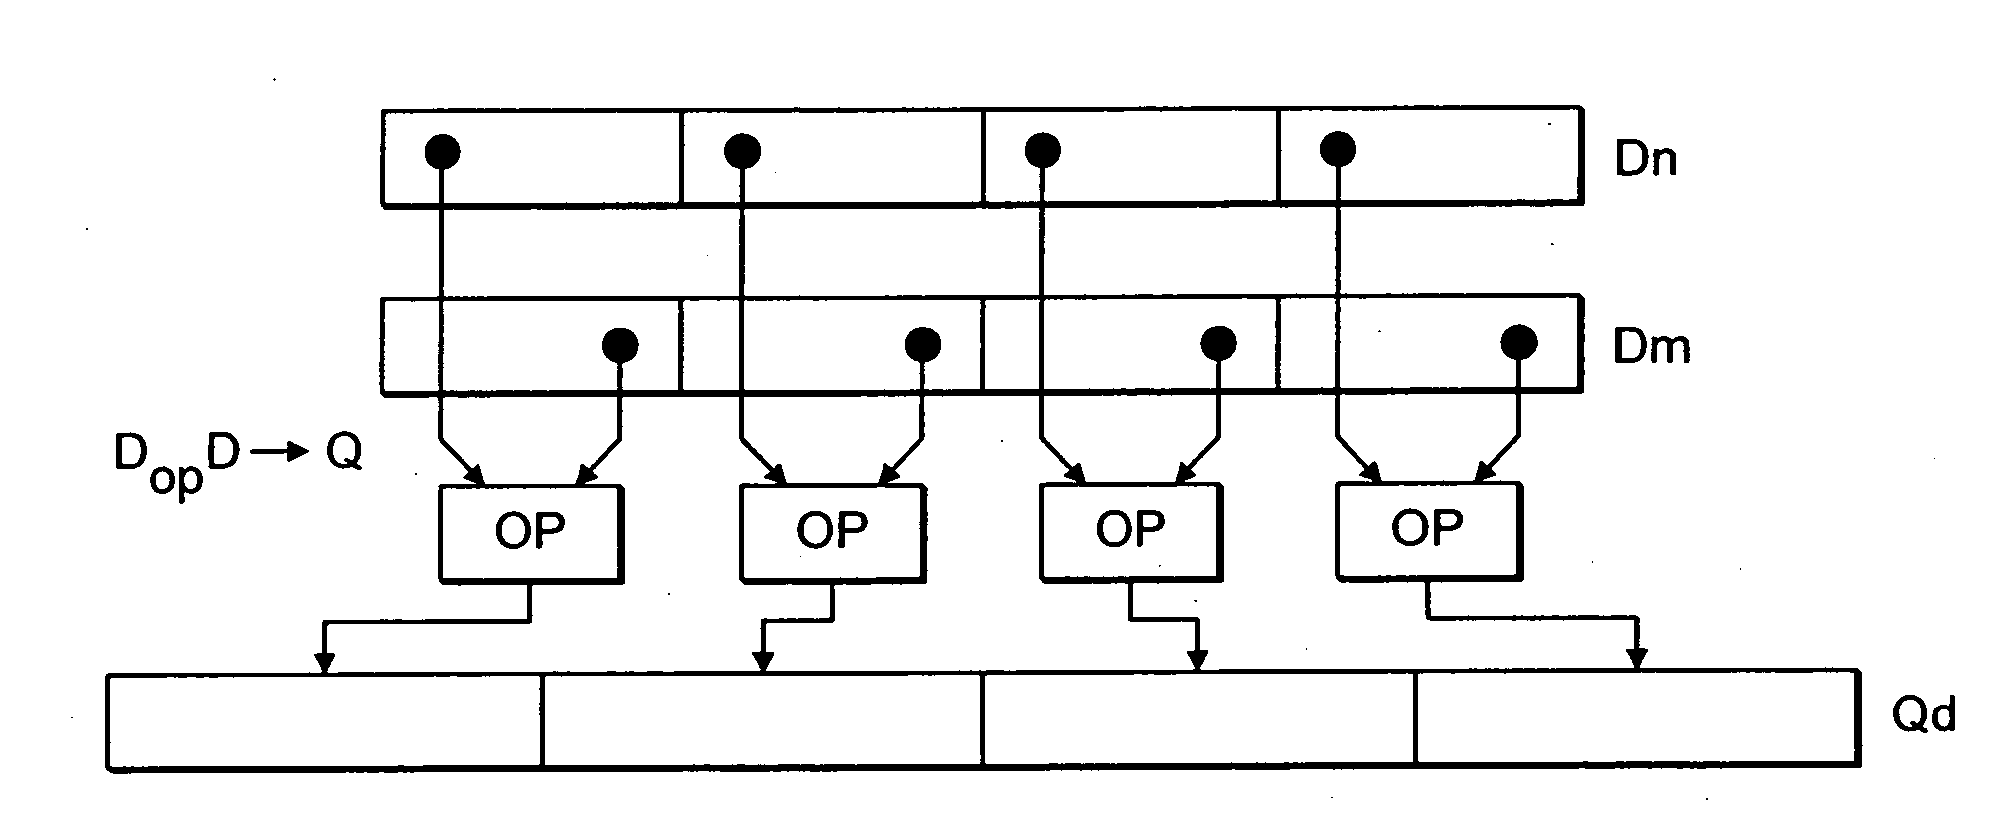 Data element size control within parallel lanes of processing